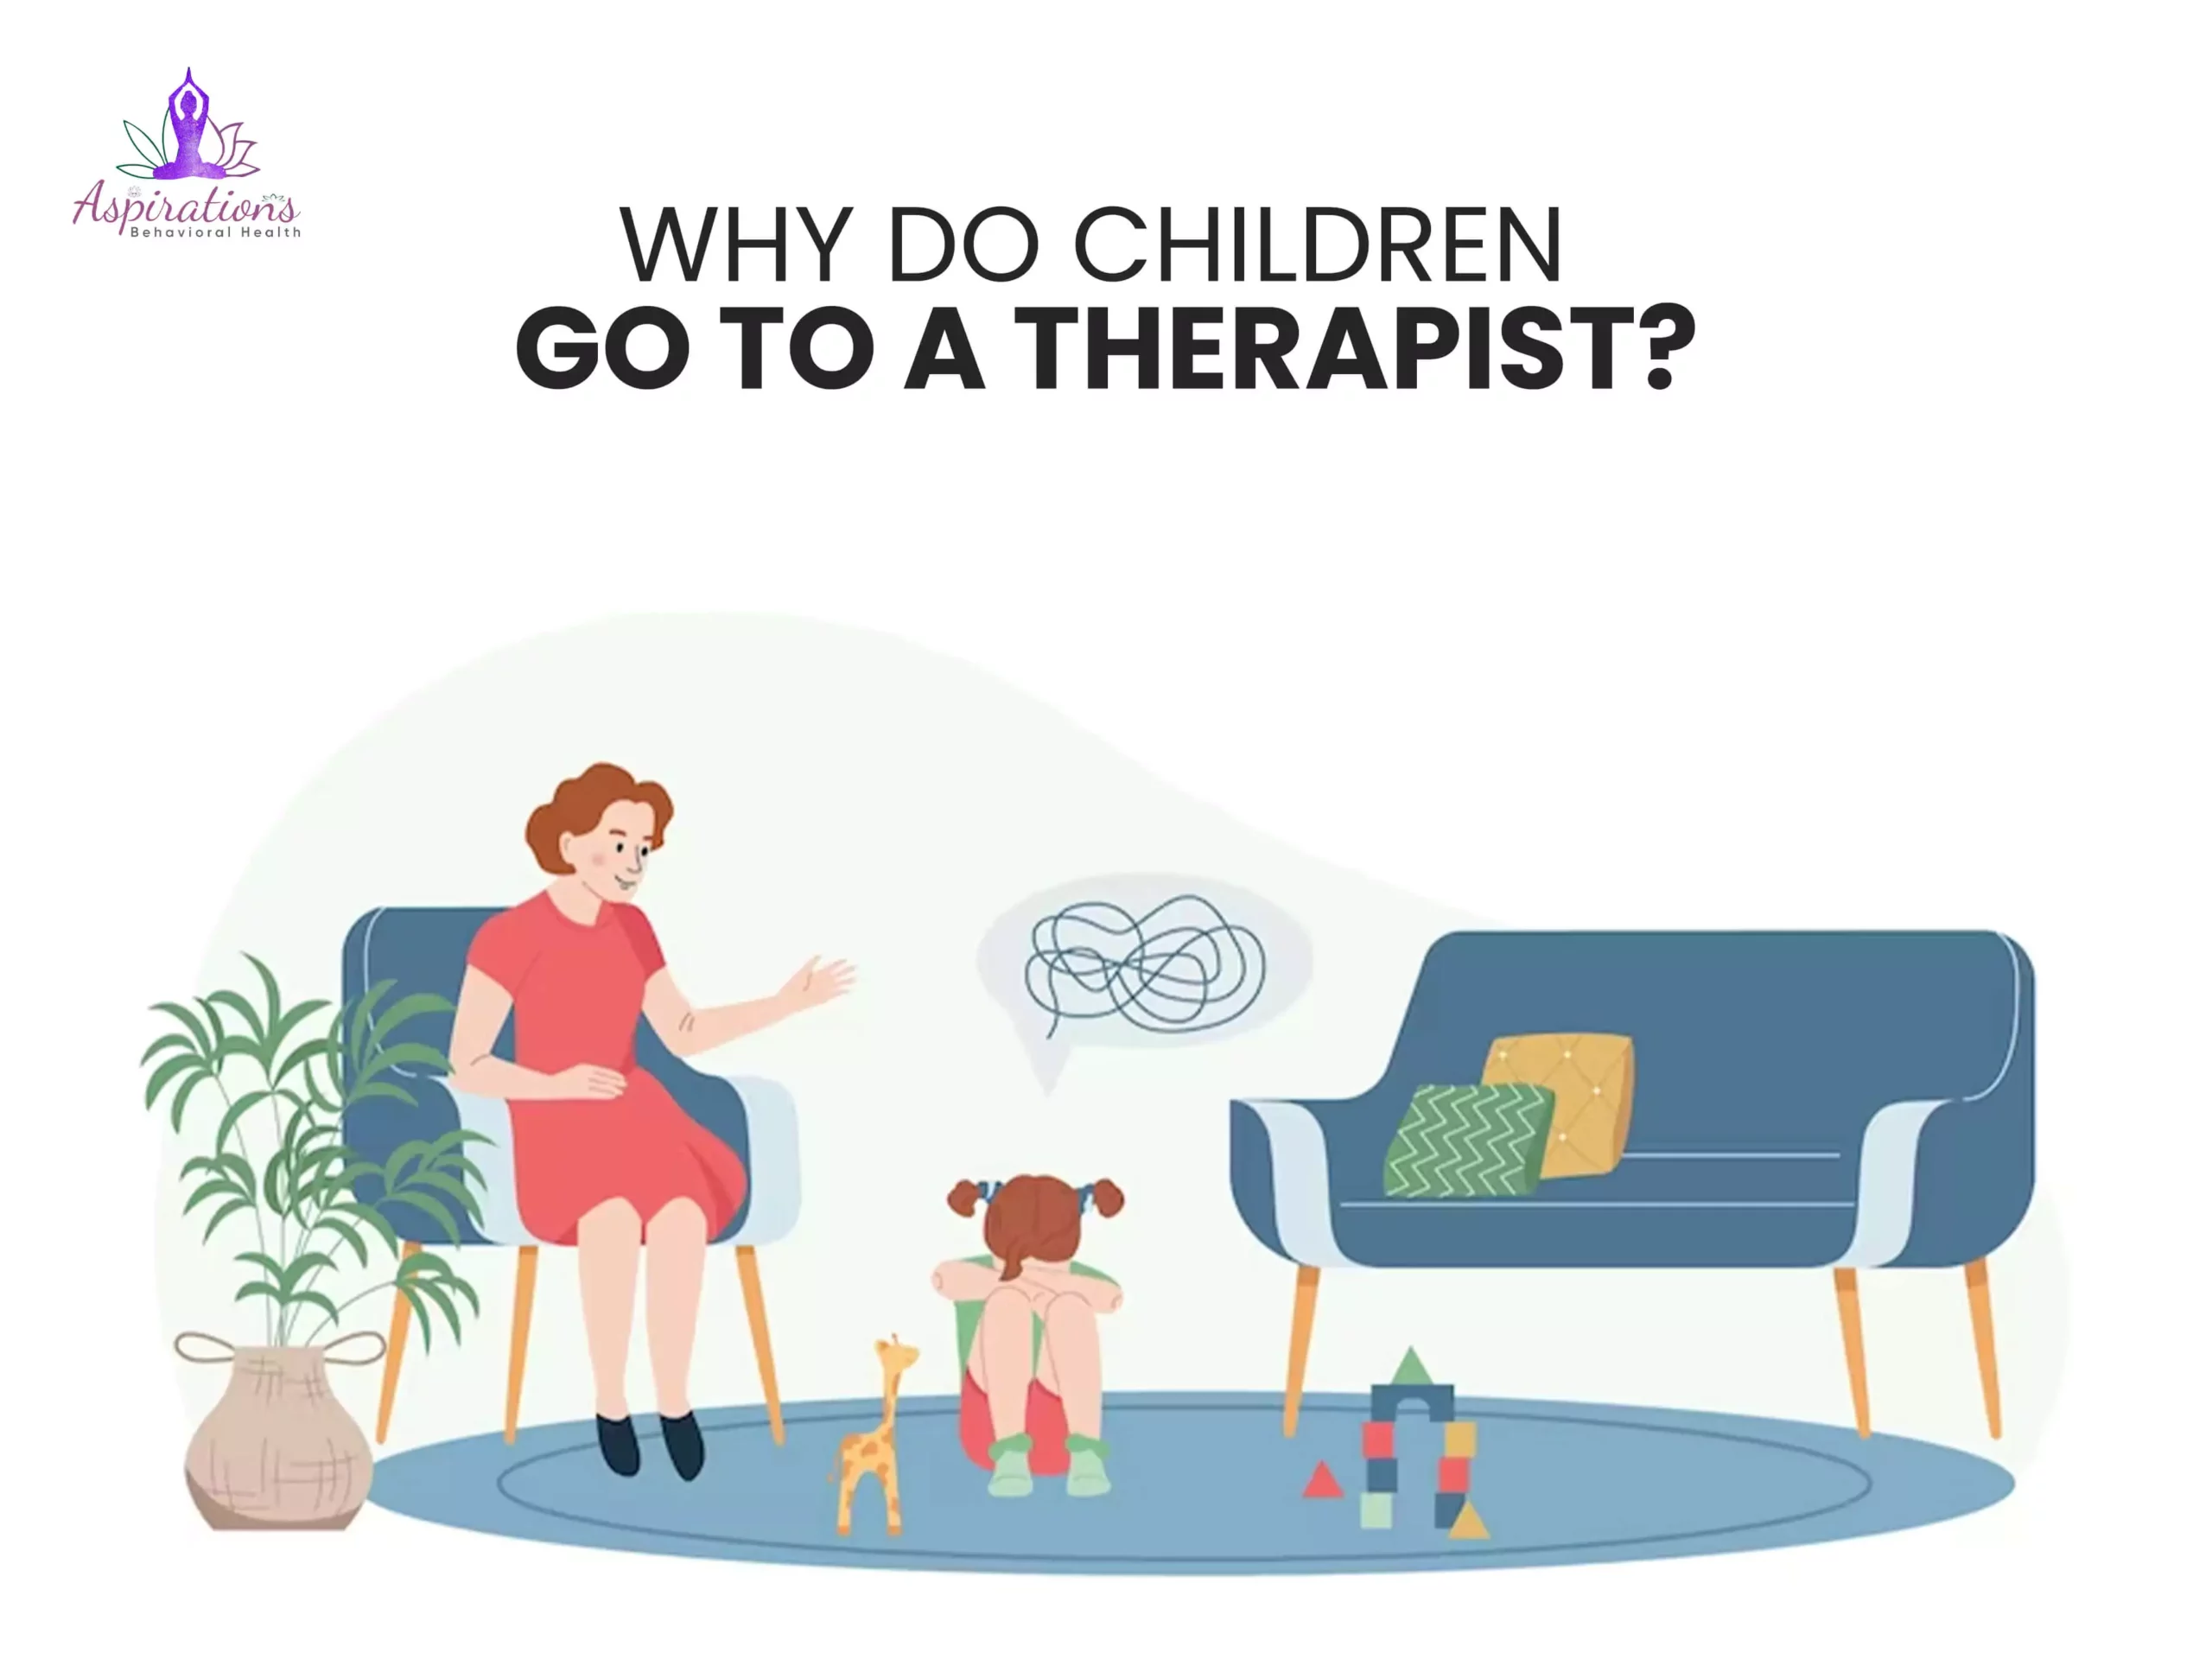 Why Do Children Go to a Therapist?